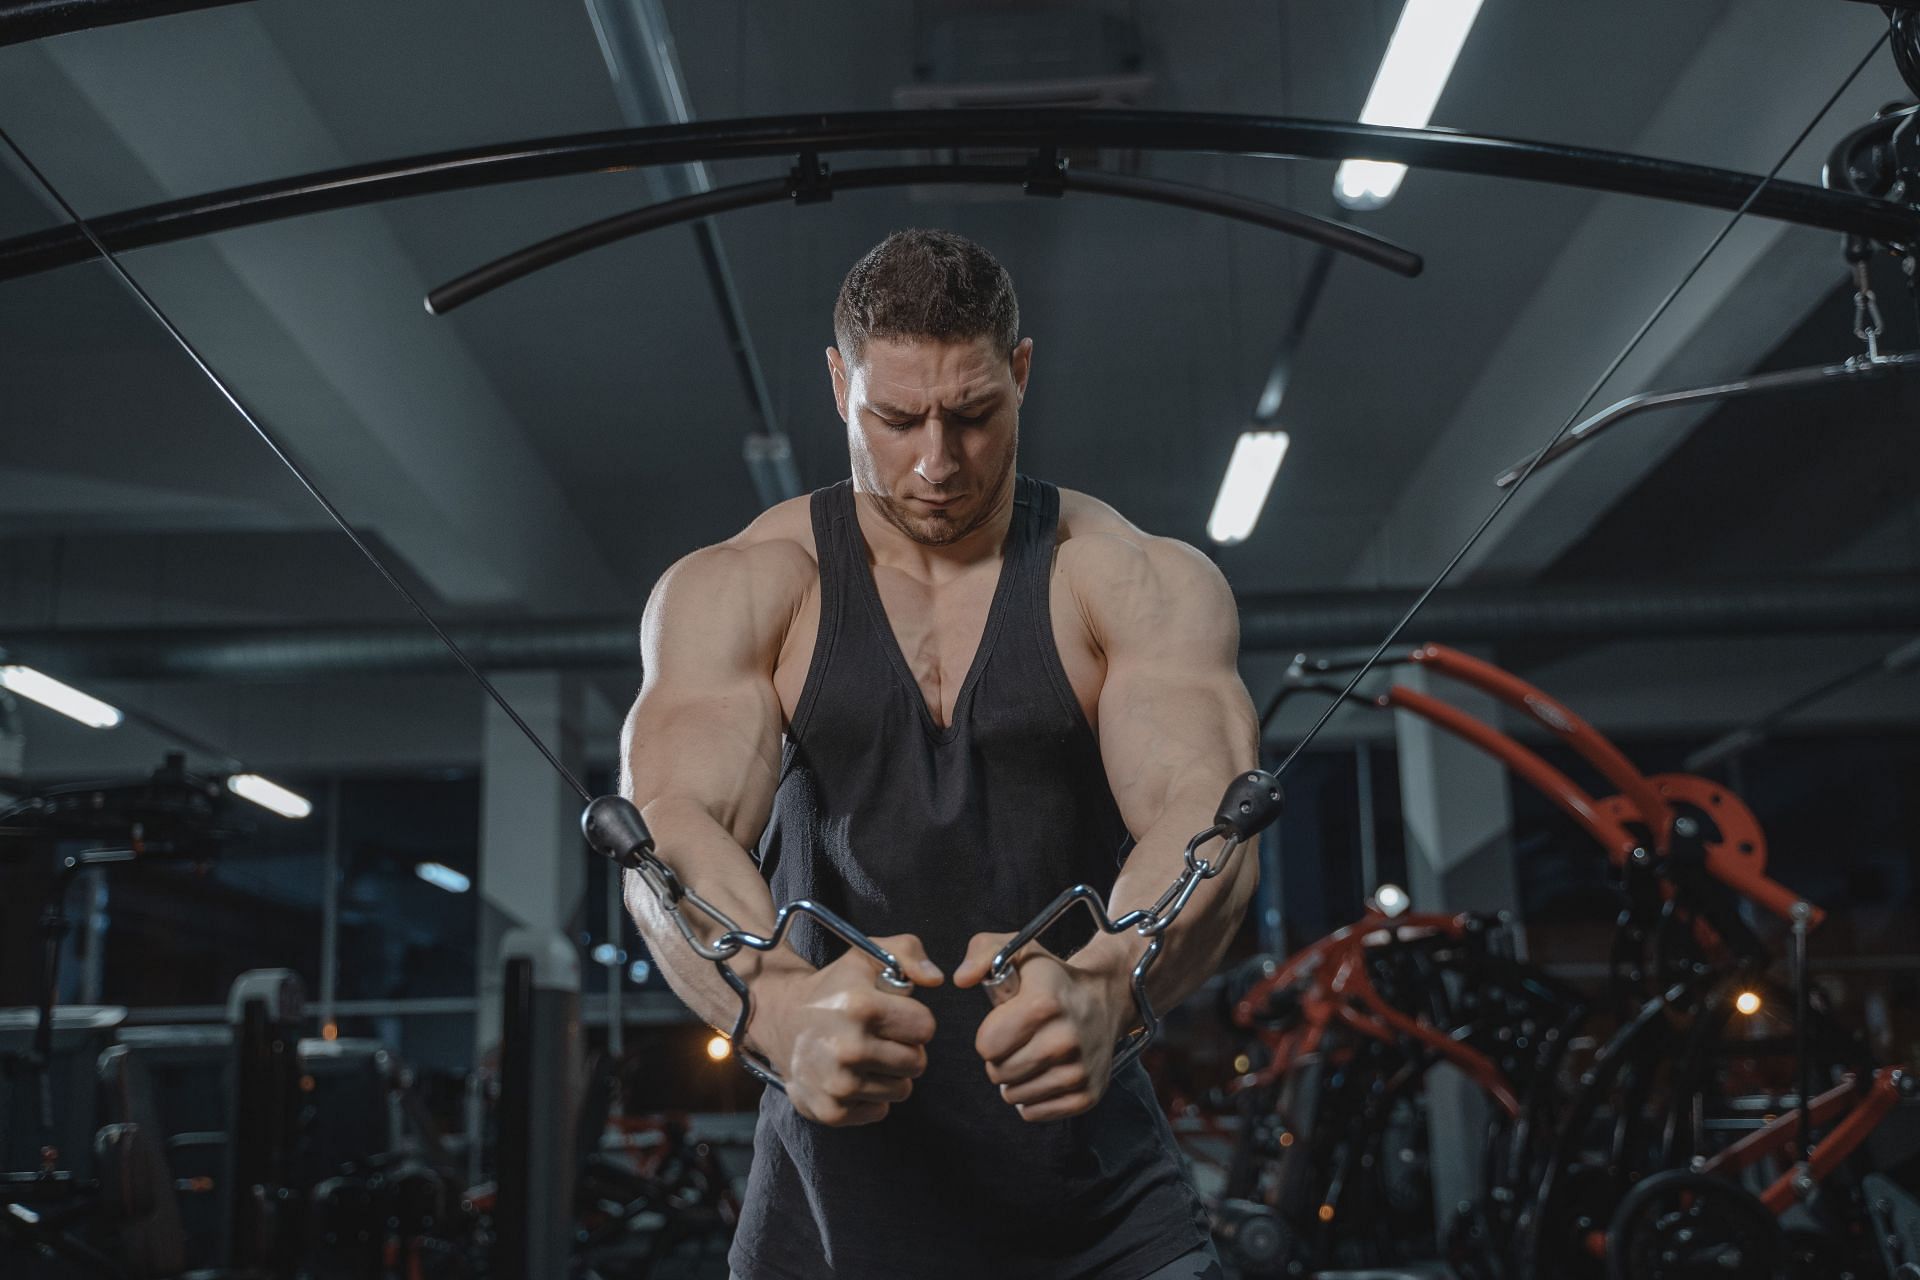 Challenge your chest muscles with these six best chest exercises. (Image by Tima Miroshnichenko / Pexels)